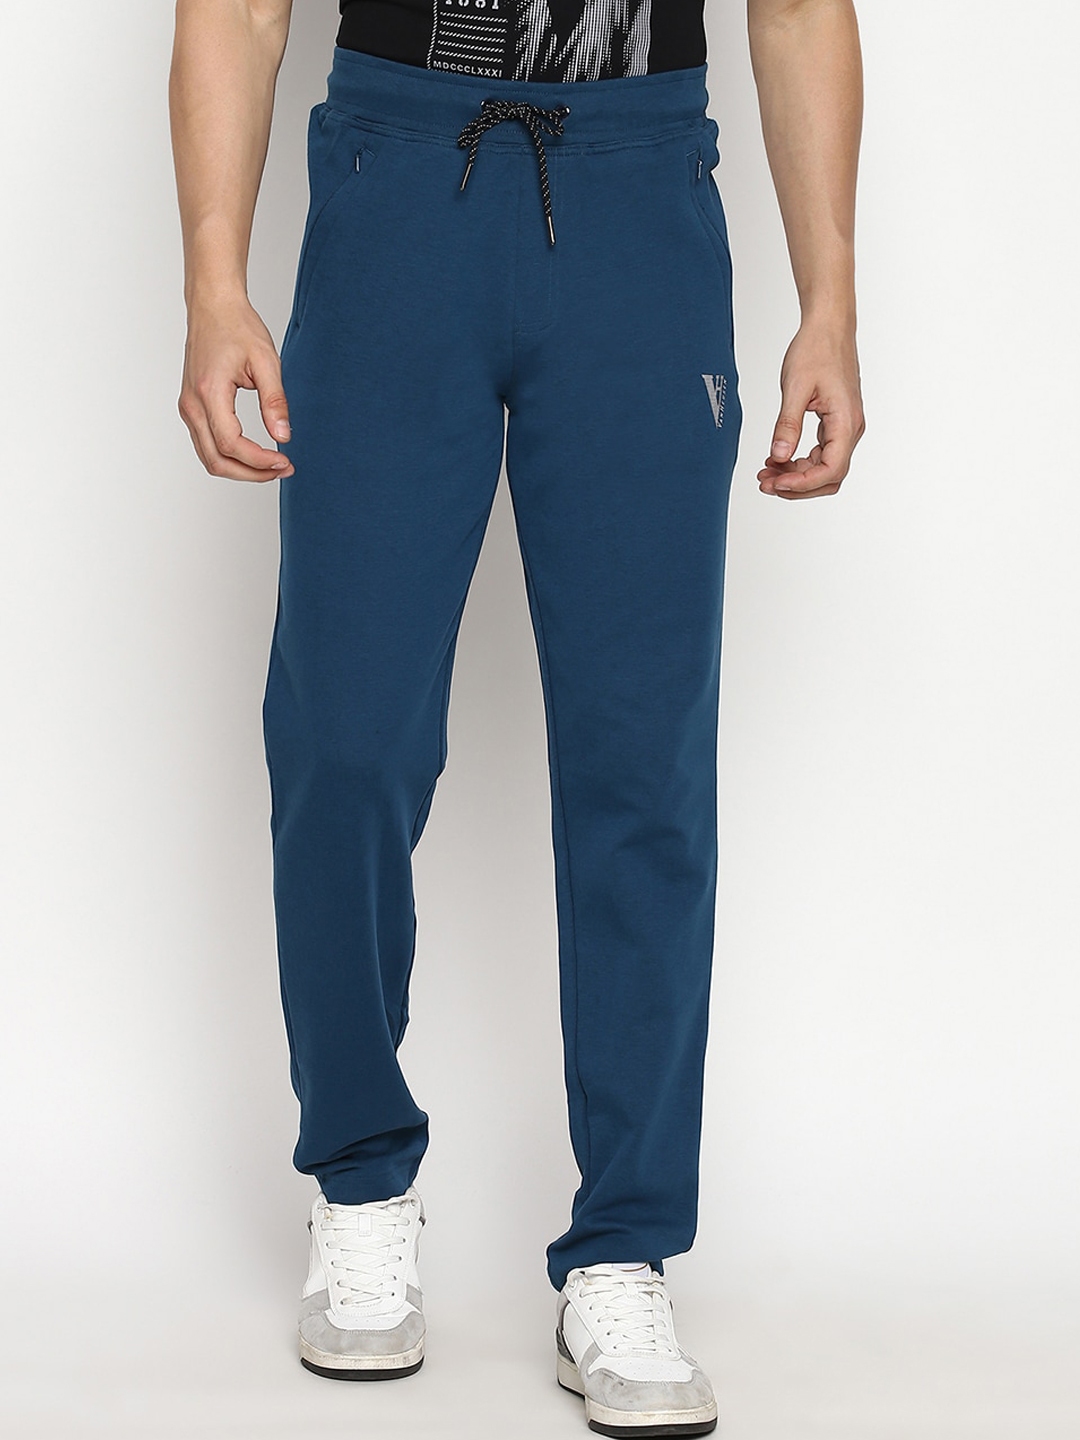 XYXX Athleisure Men's Cotton Track Pants - Relaxed Fit, Soft